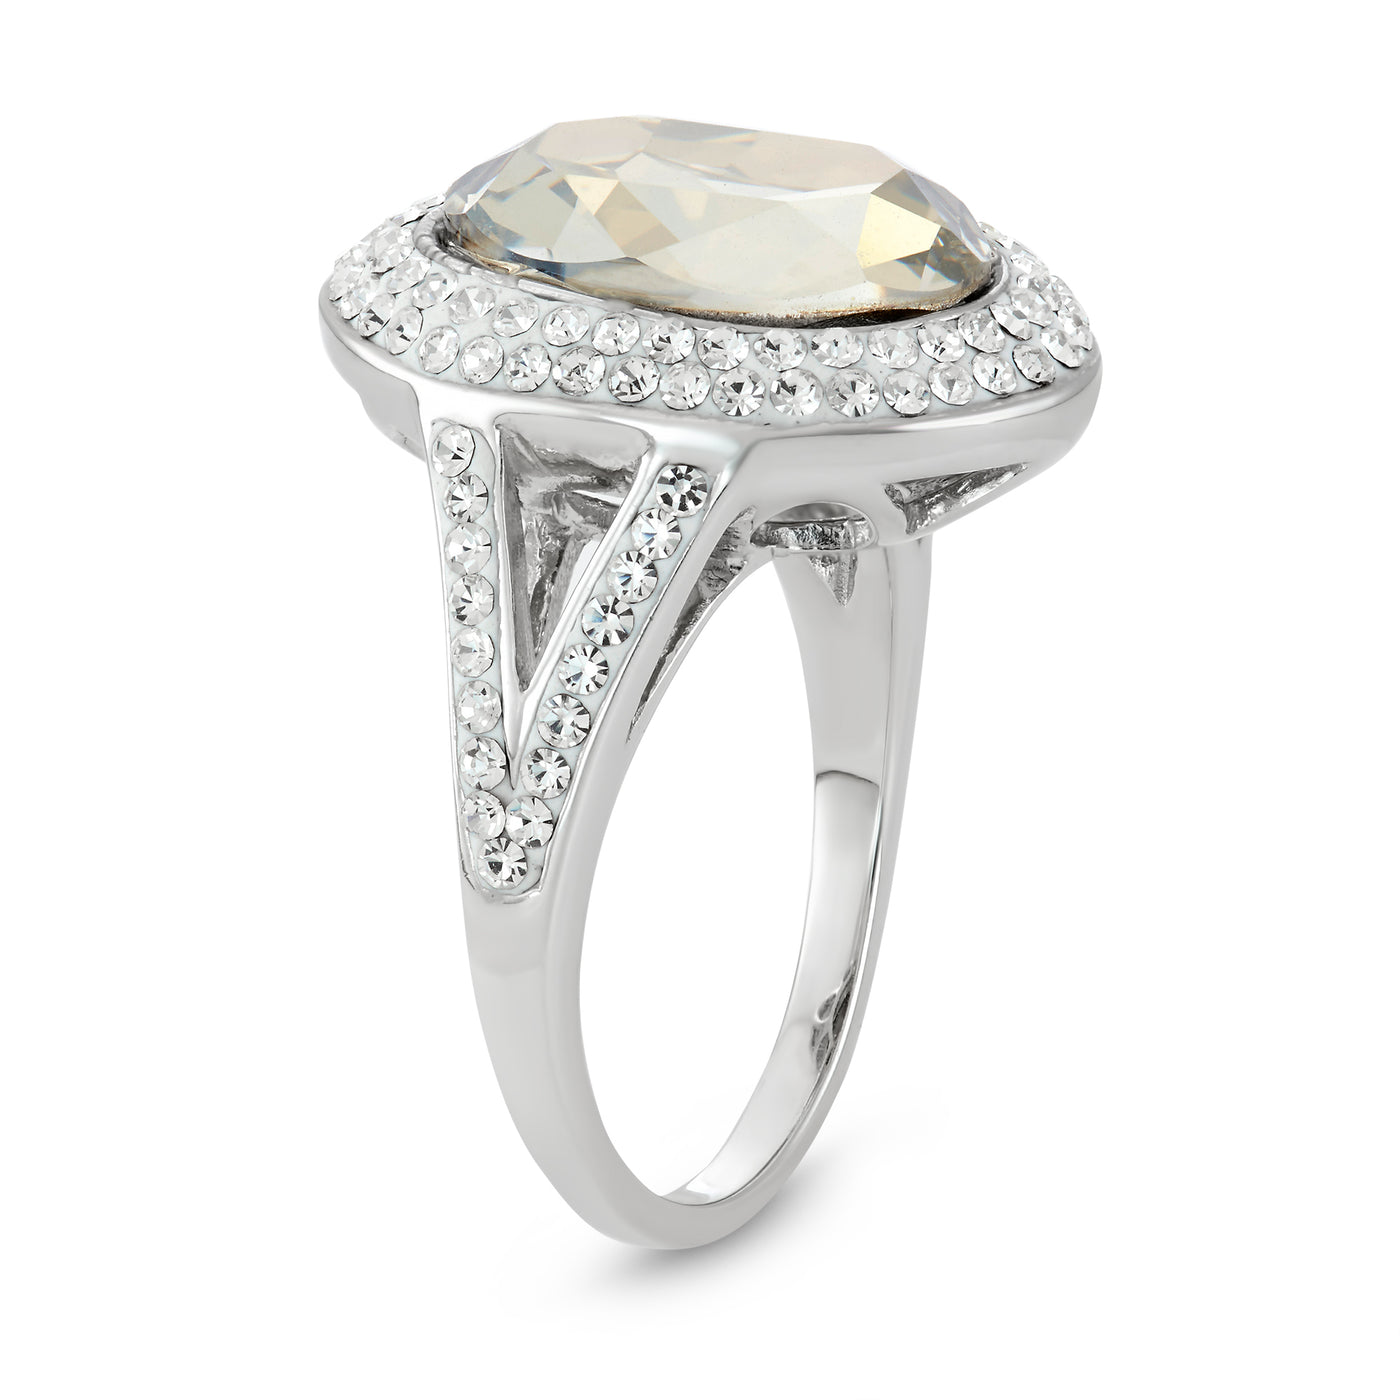 Rhodium Plated Sterling Silver Oval Ring With Clear and Silver Shade Crystal Elements